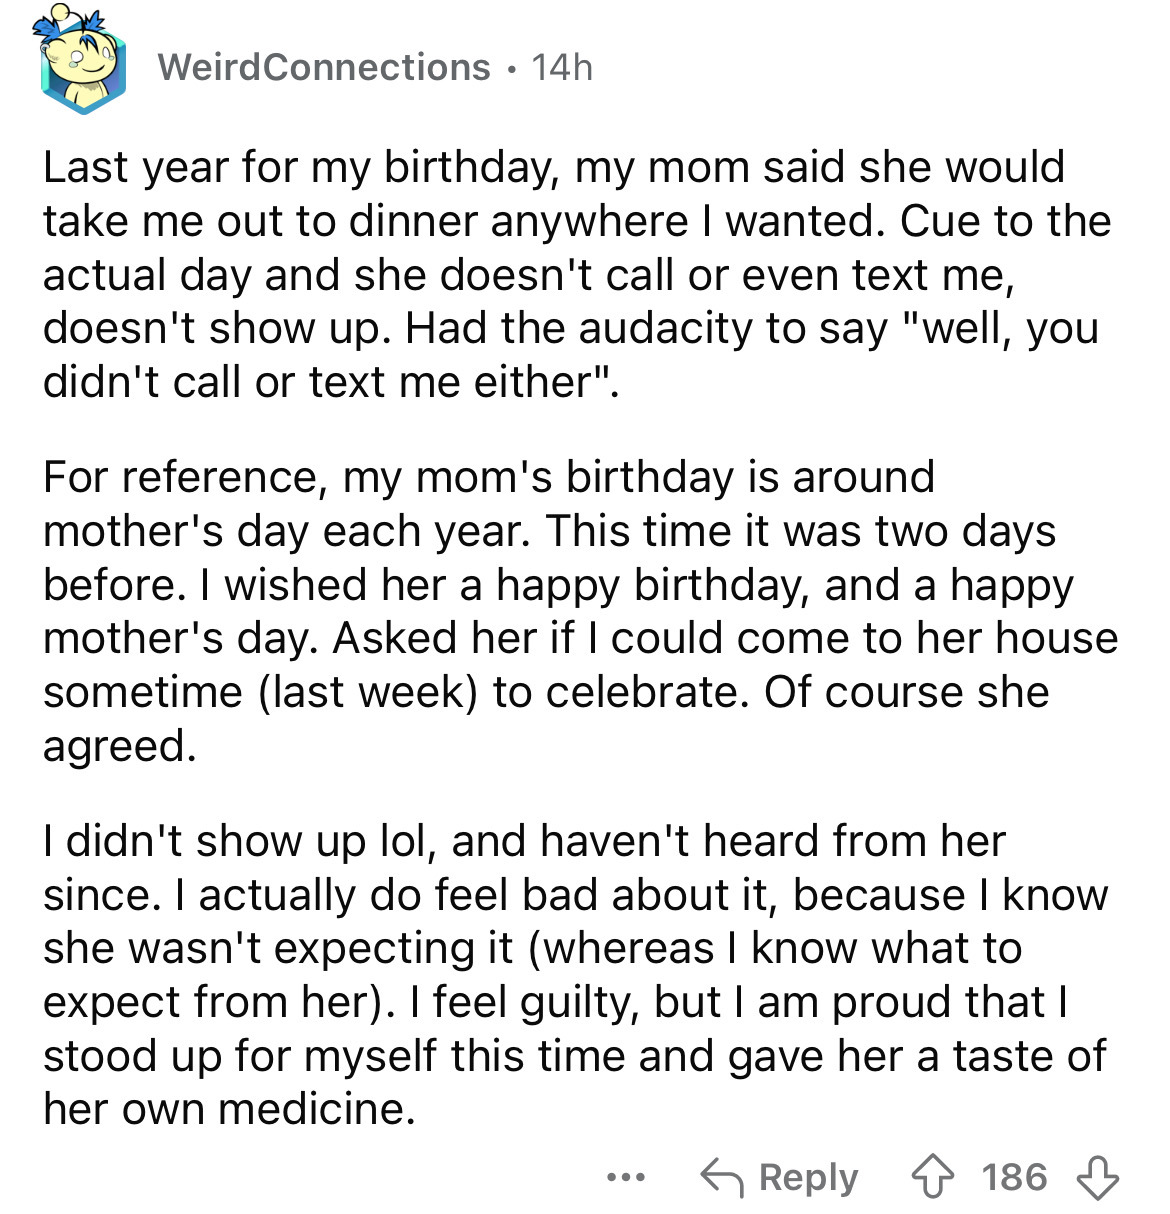 document - Weird Connections 14h Last year for my birthday, my mom said she would take me out to dinner anywhere I wanted. Cue to the actual day and she doesn't call or even text me, doesn't show up. Had the audacity to say "well, you didn't call or text 